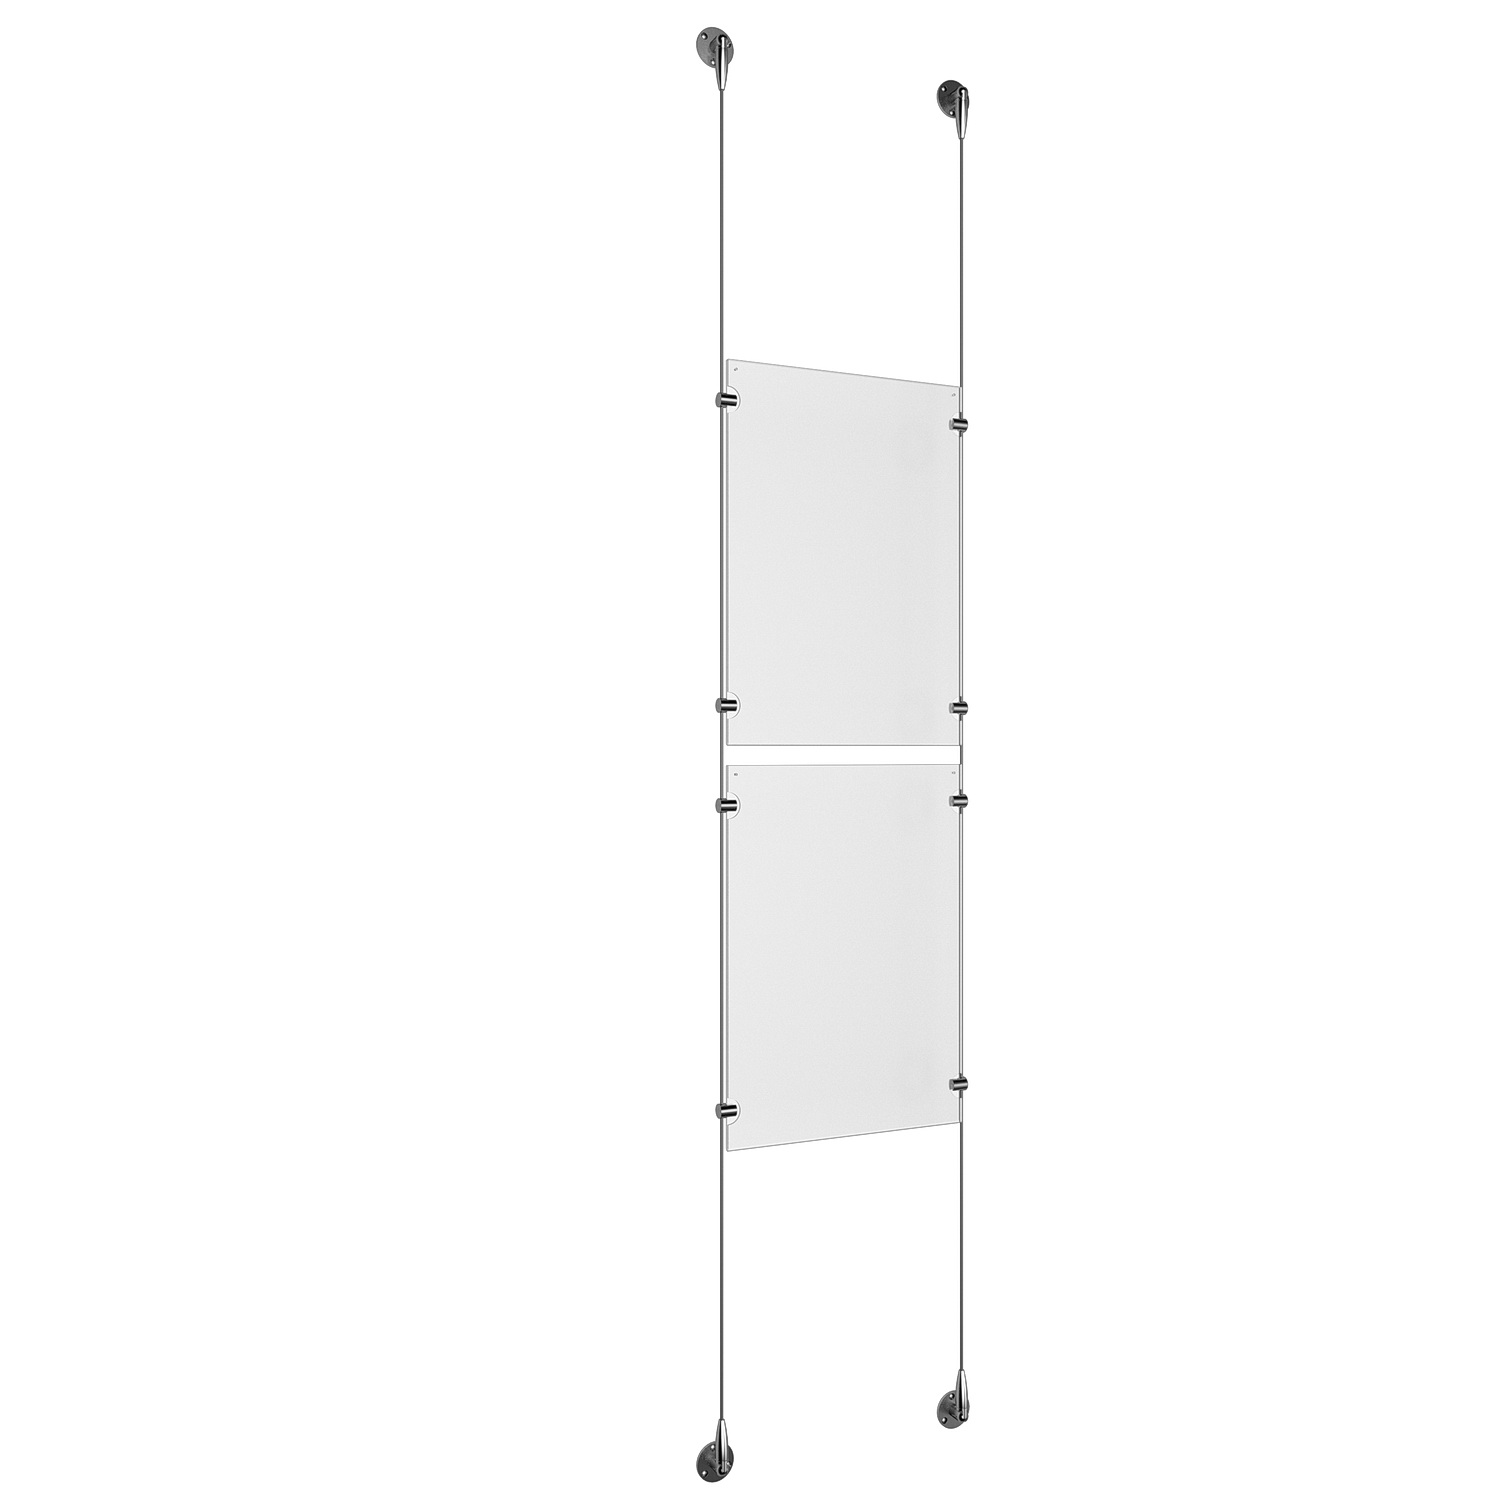 (2) 11'' Width x 17'' Height Clear Acrylic Frame & (2) Aluminum Clear Anodized Adjustable Angle Signature 1/8'' Diameter Cable Systems with (8) Single-Sided Panel Grippers